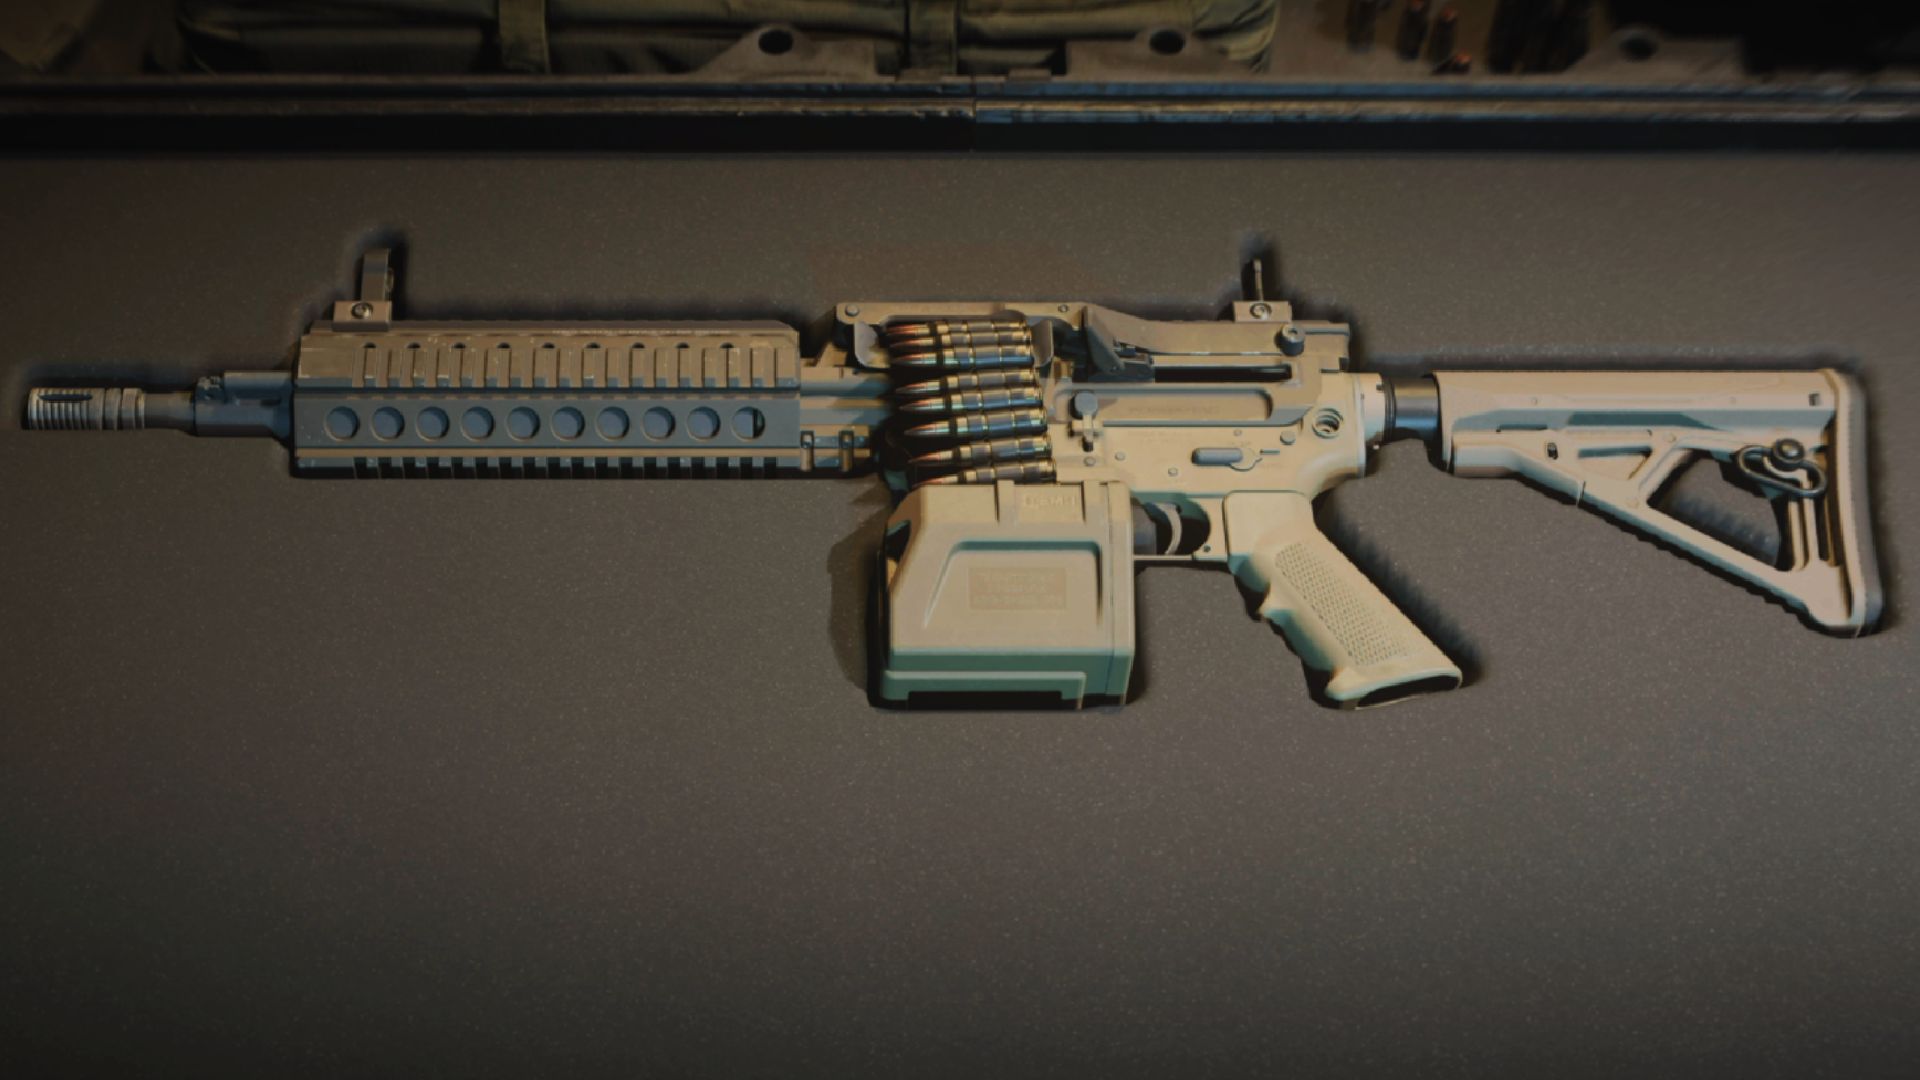 Modern Warfare 2 Best LMG: The 556 Icarus can be seen